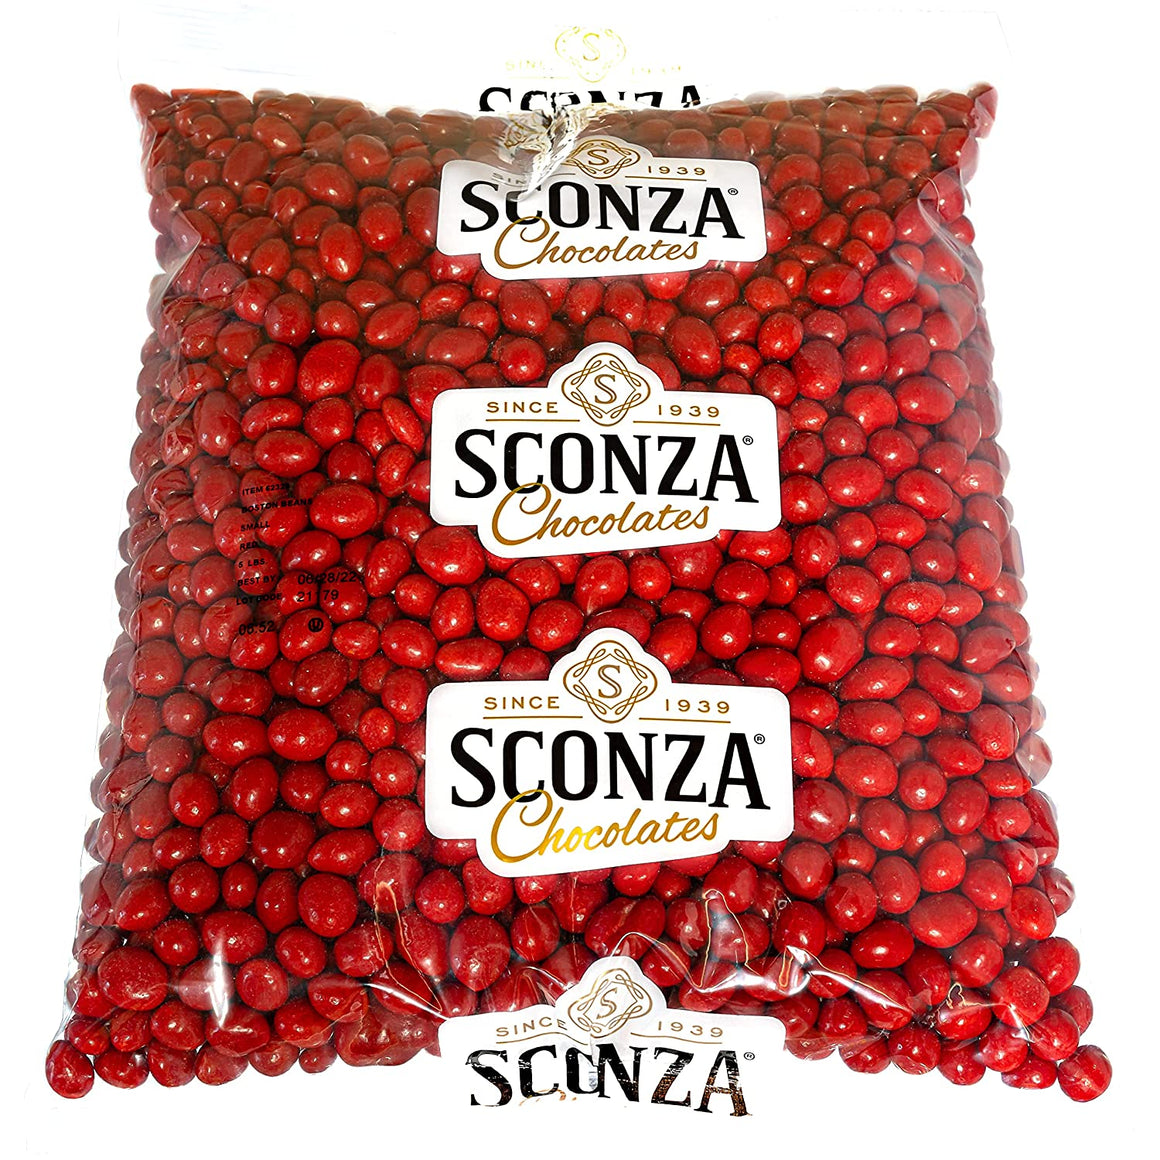 All City Candy Sconza Boston Baked Bean Bulk 5 lb. Bag Sconza Candy For fresh candy and great service, visit www.allcitycandy.com